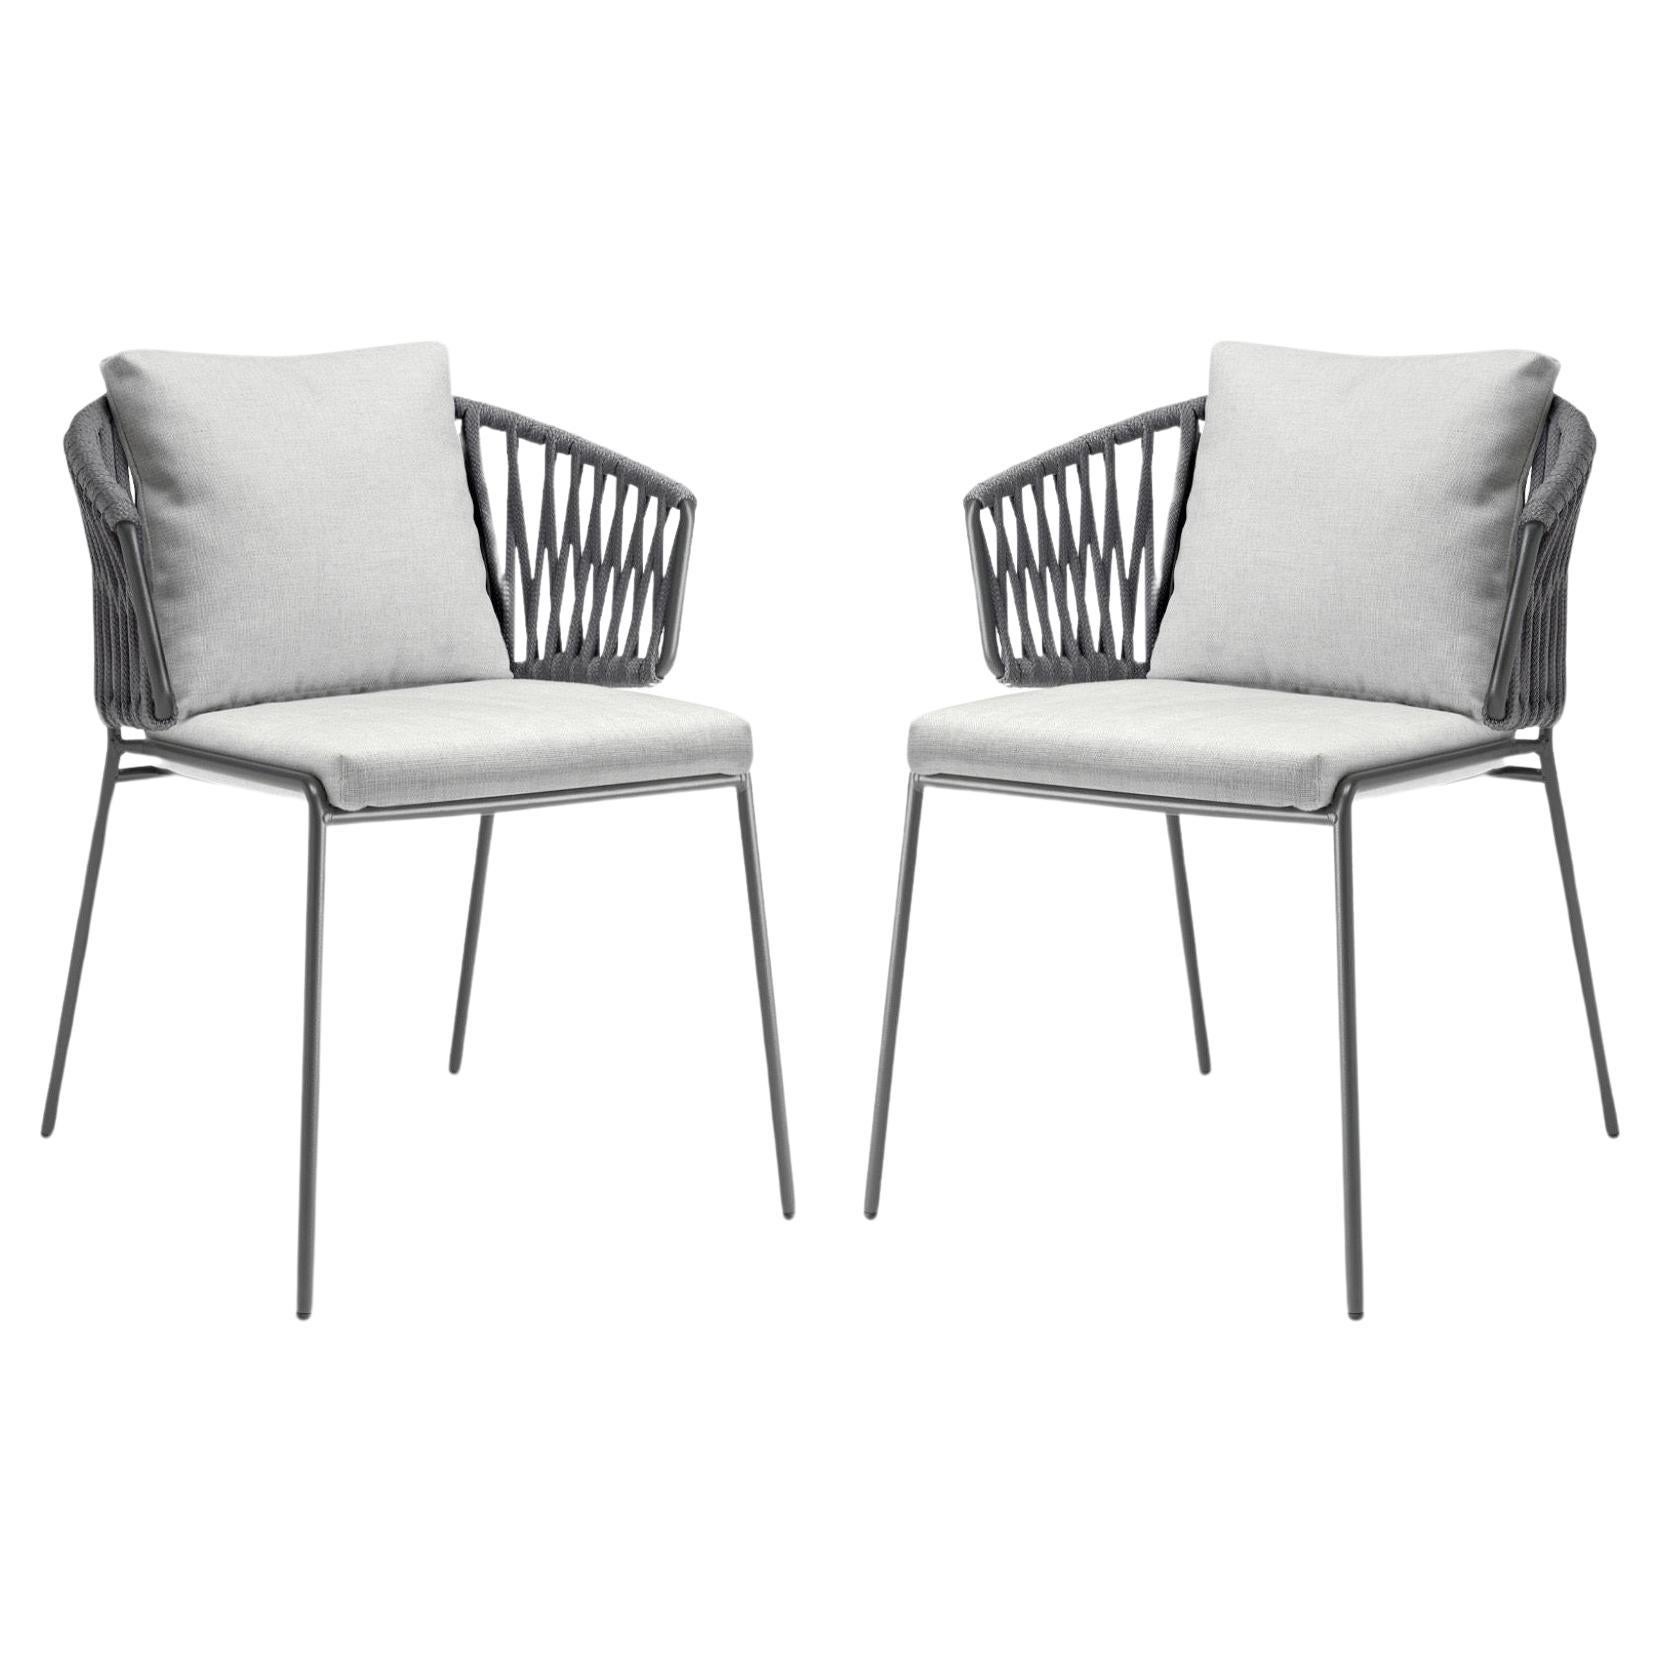 Pair of Grey Outdoor or Indoor Metal and Cord Armchairs, 21 century